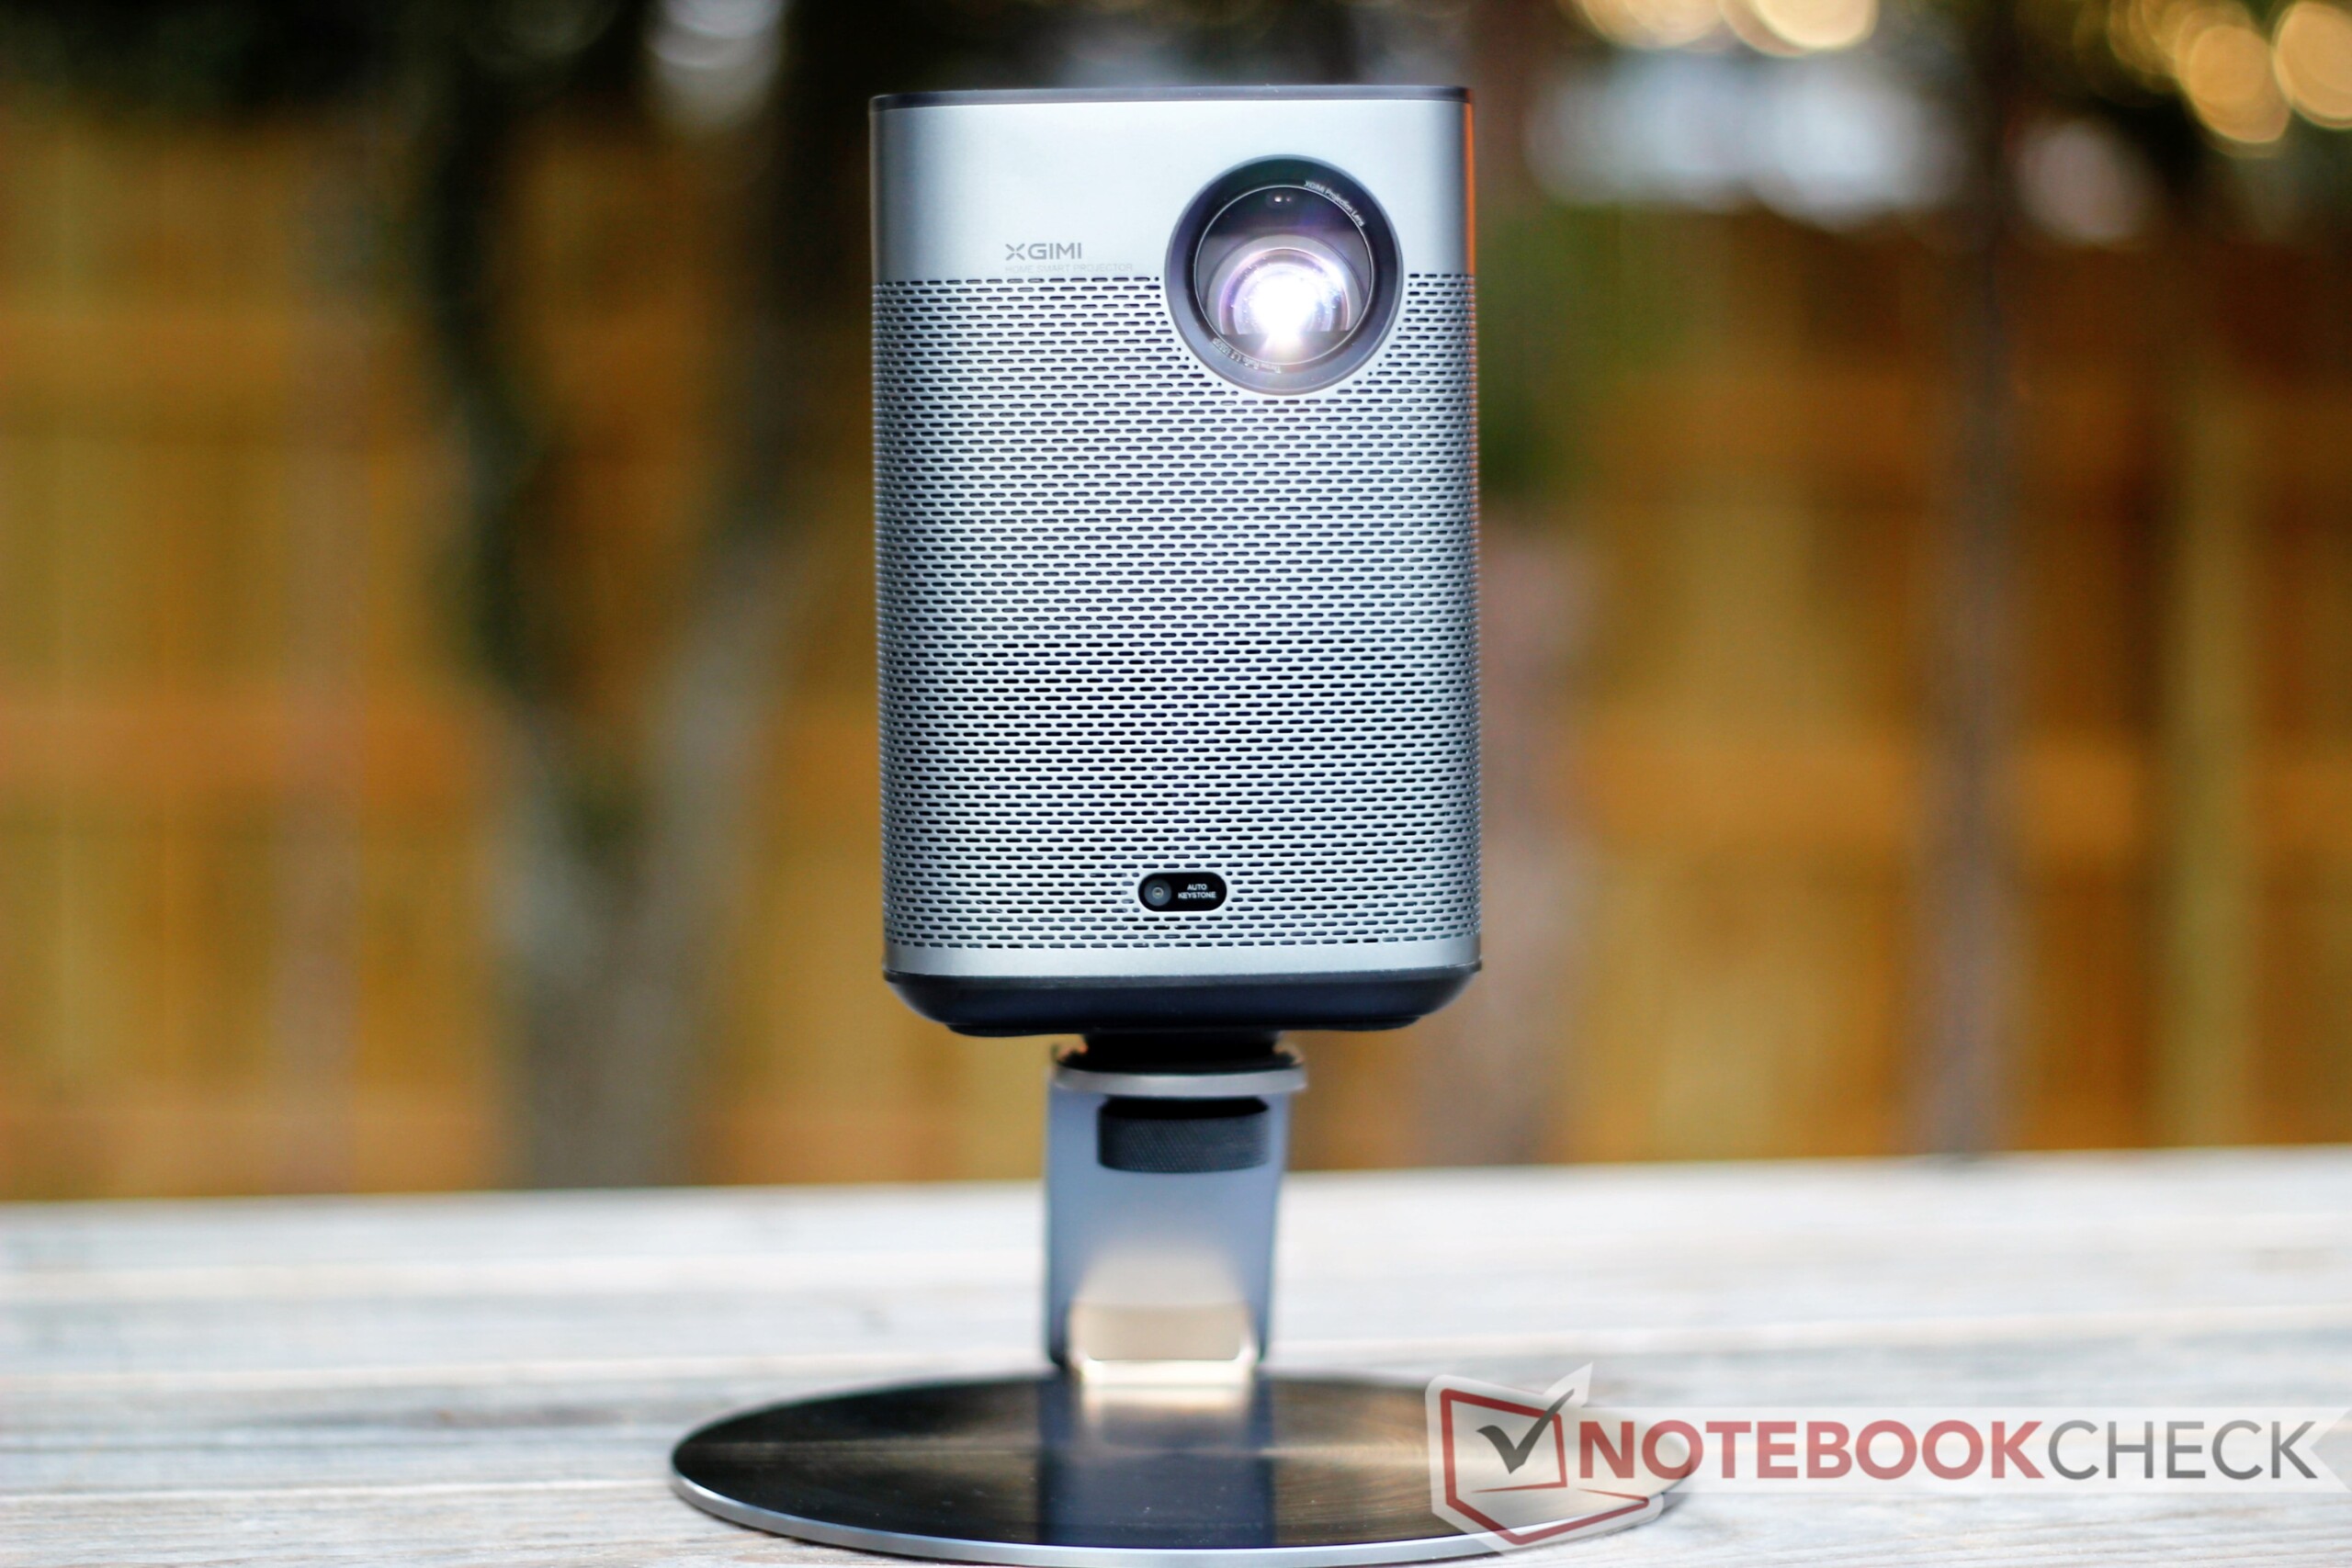 Xgimi Halo Plus (Halo+) portable smart projector hands-on